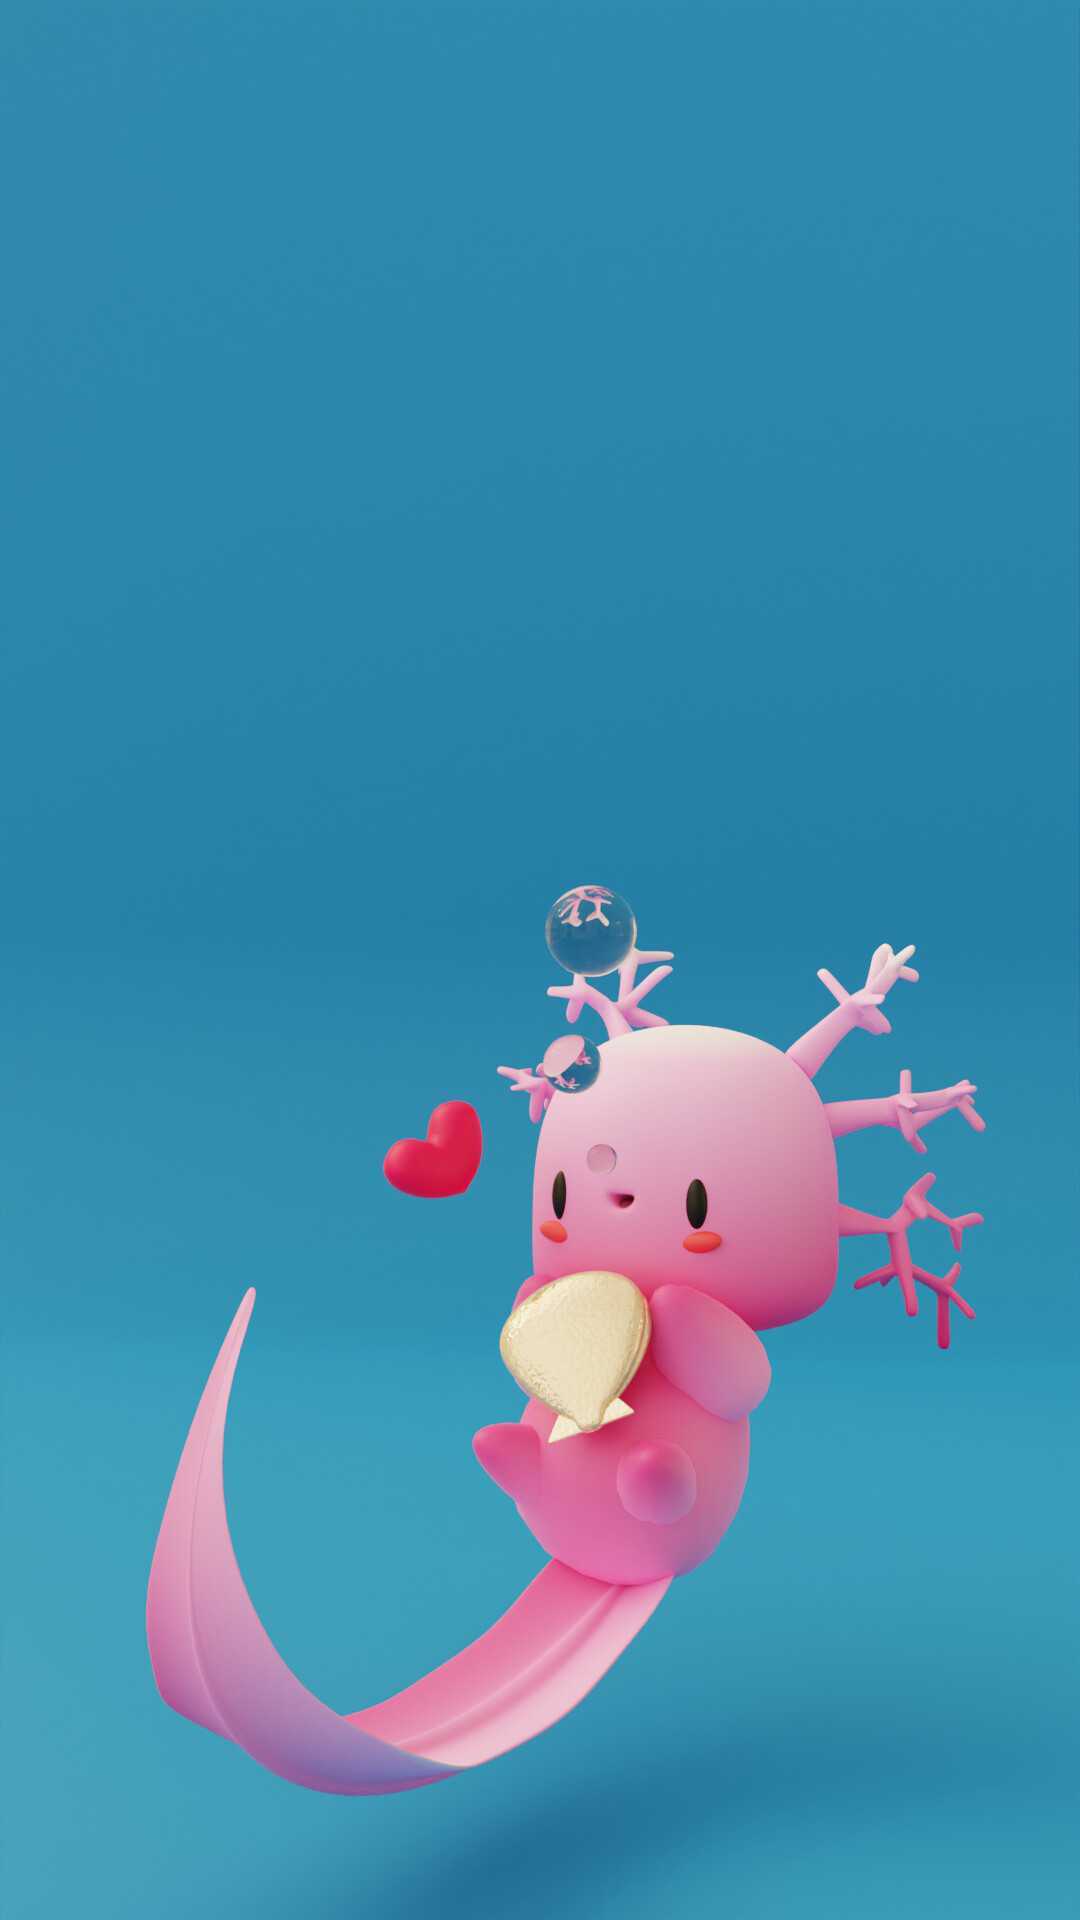 A cute little pink creature with wings and heart shaped eyes - Axolotl